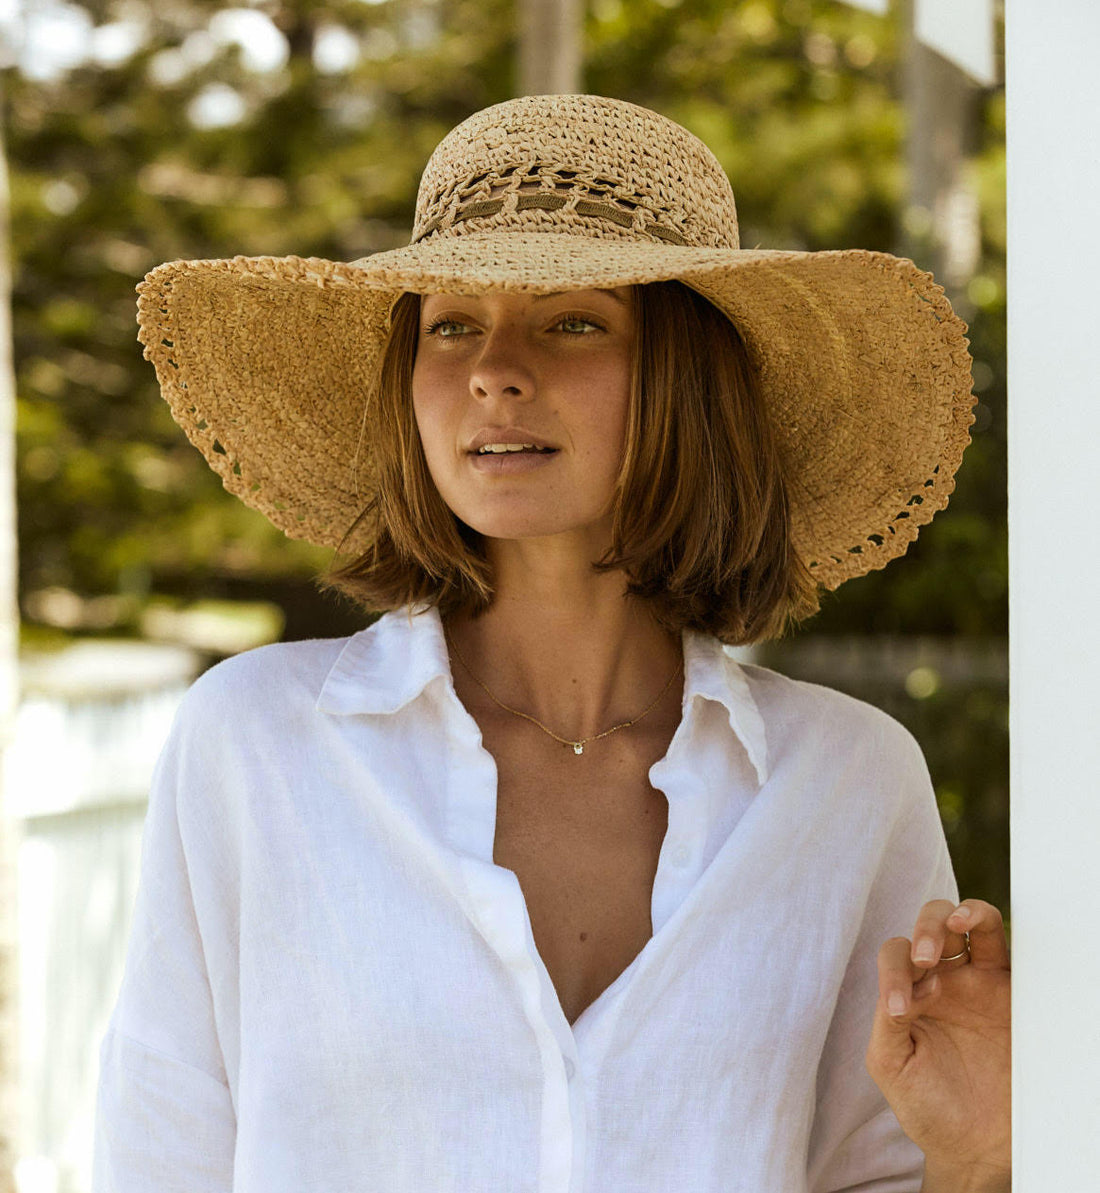 Buy Oversized Beach Straw Hats for Women Extra Large Wide Brim